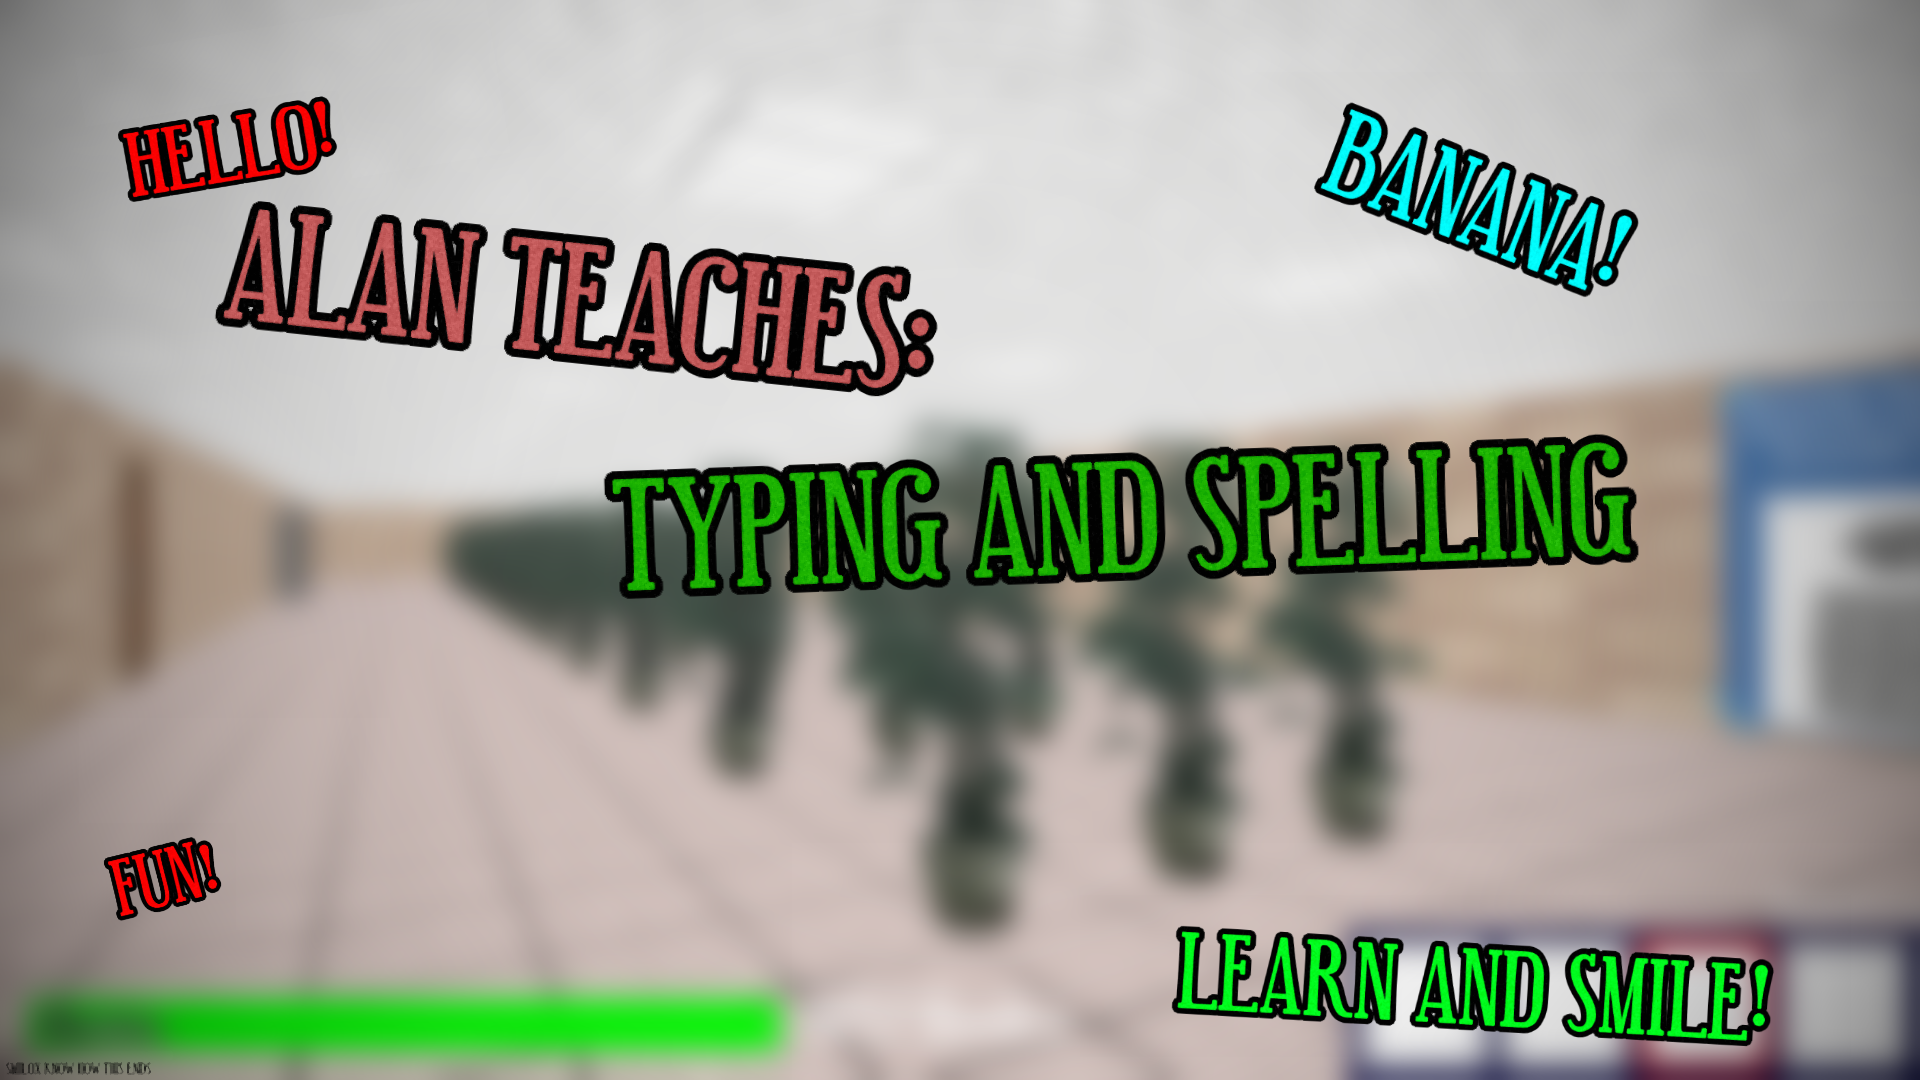 Alan Teaches: Typing and Spelling!